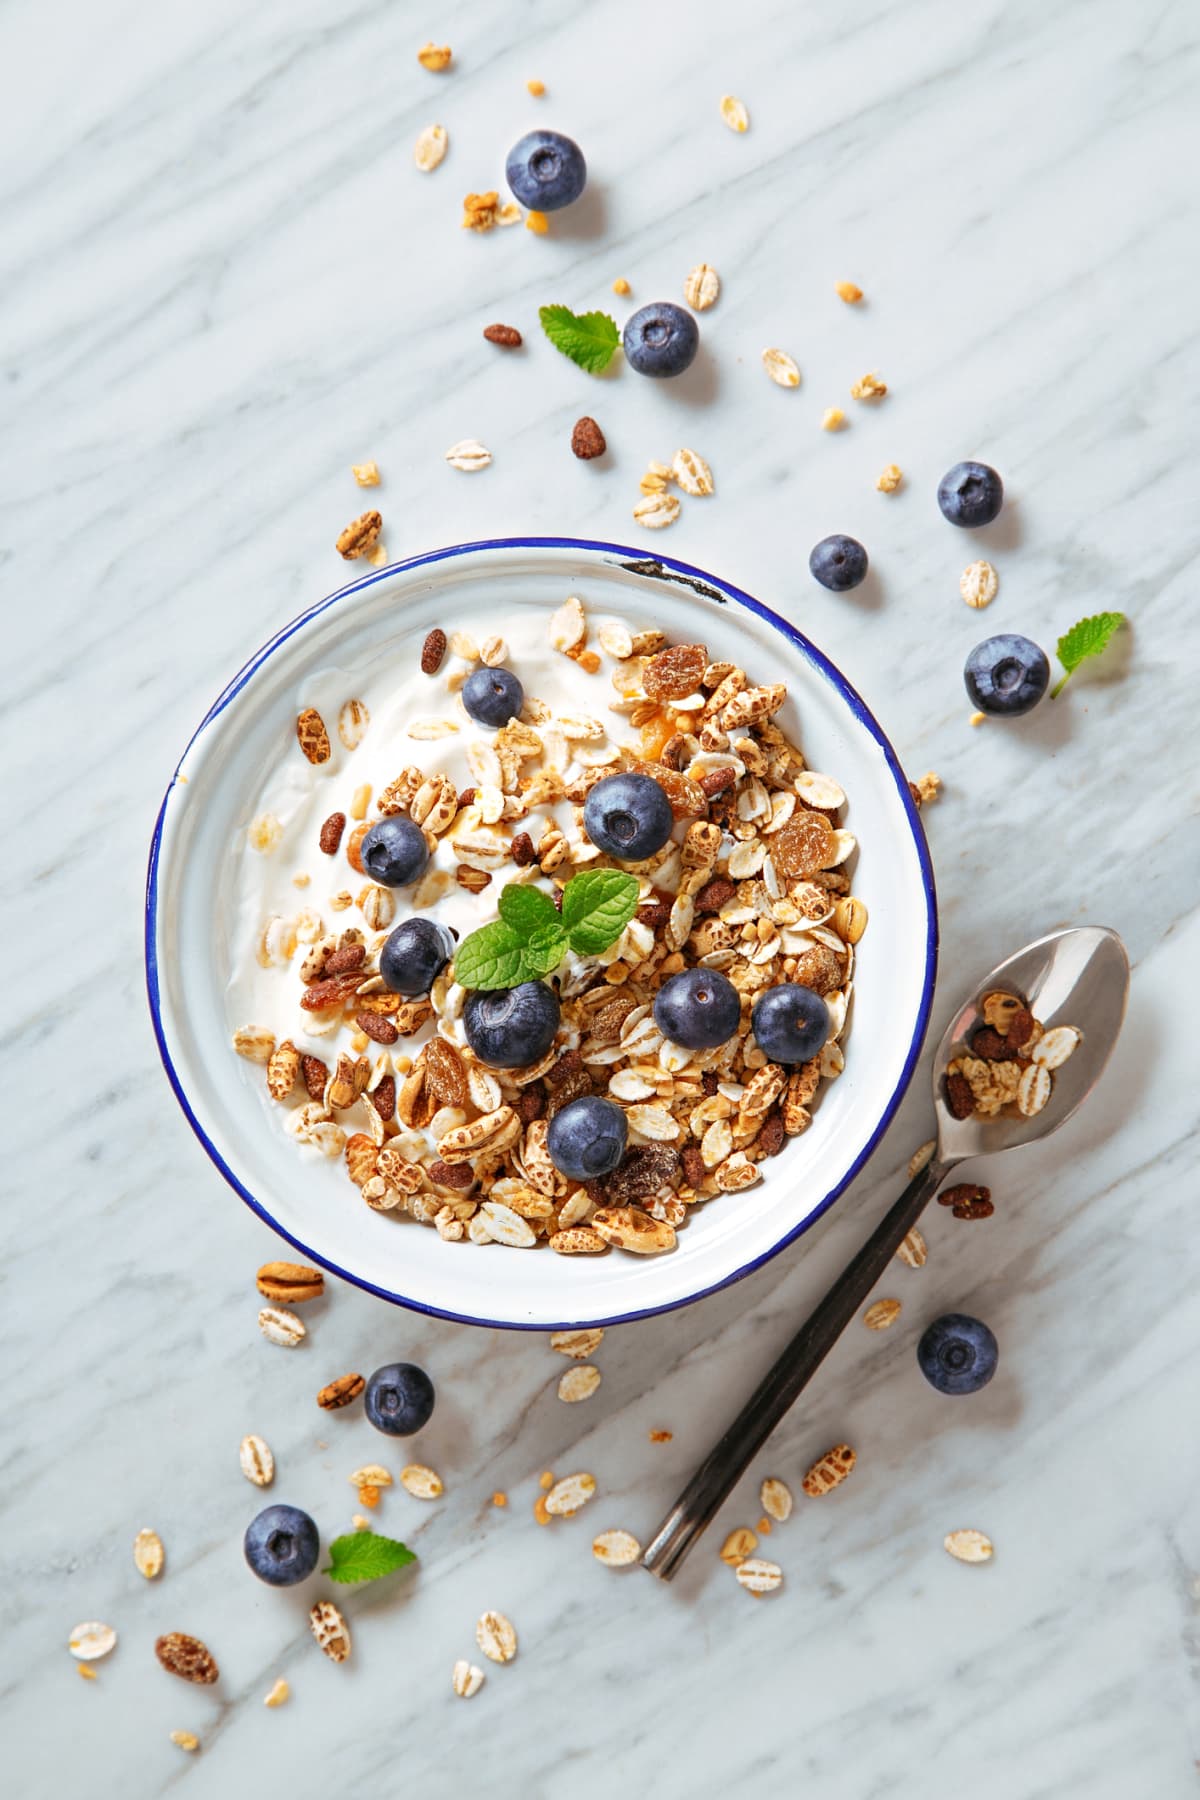 Cereals breakfast with blueberries on a marble background. Healthy morning meal with fresh berries. Top view